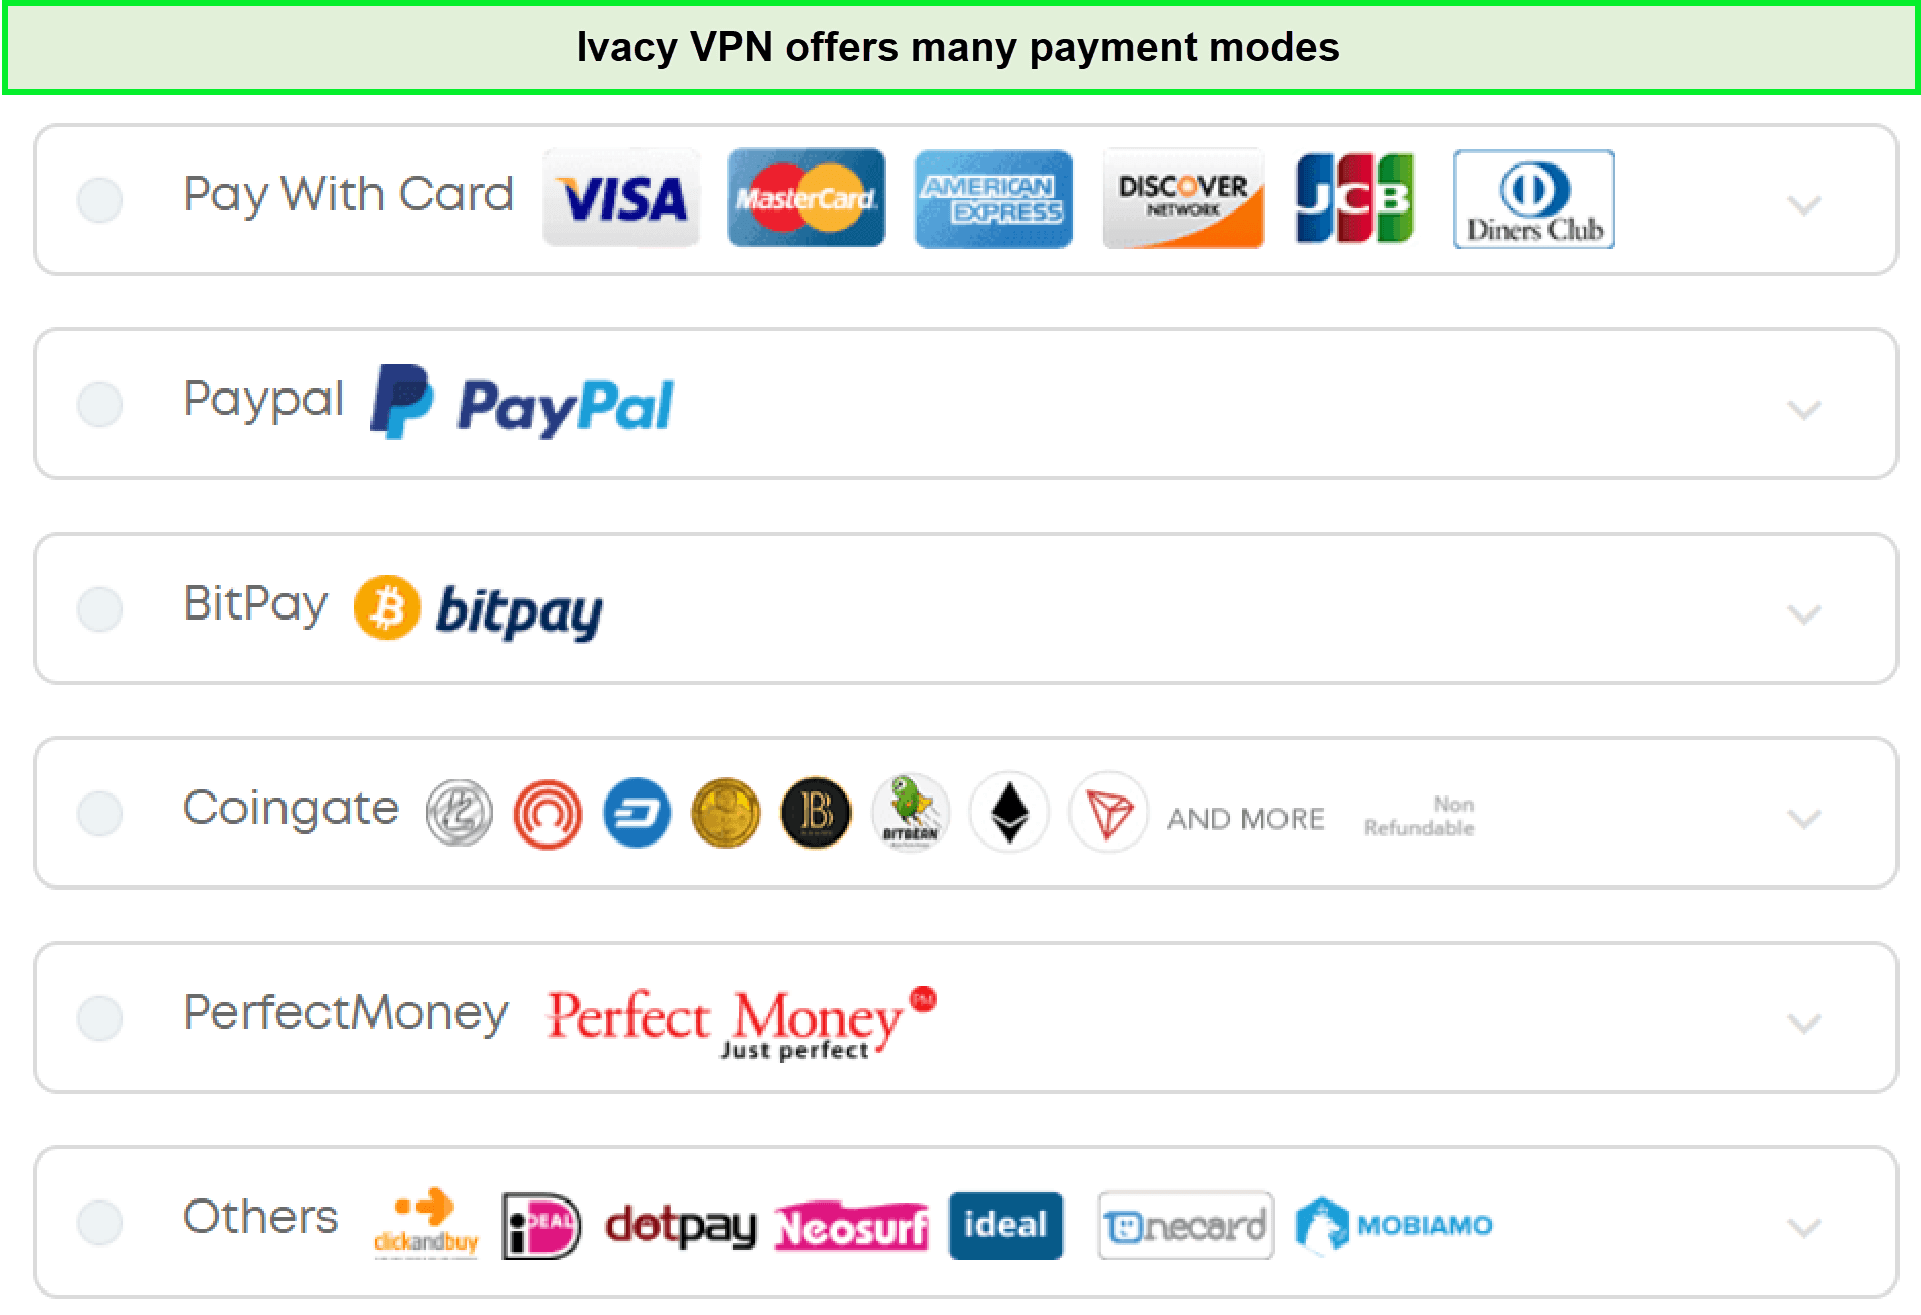 ivacy-payment-modes-in-South Korea